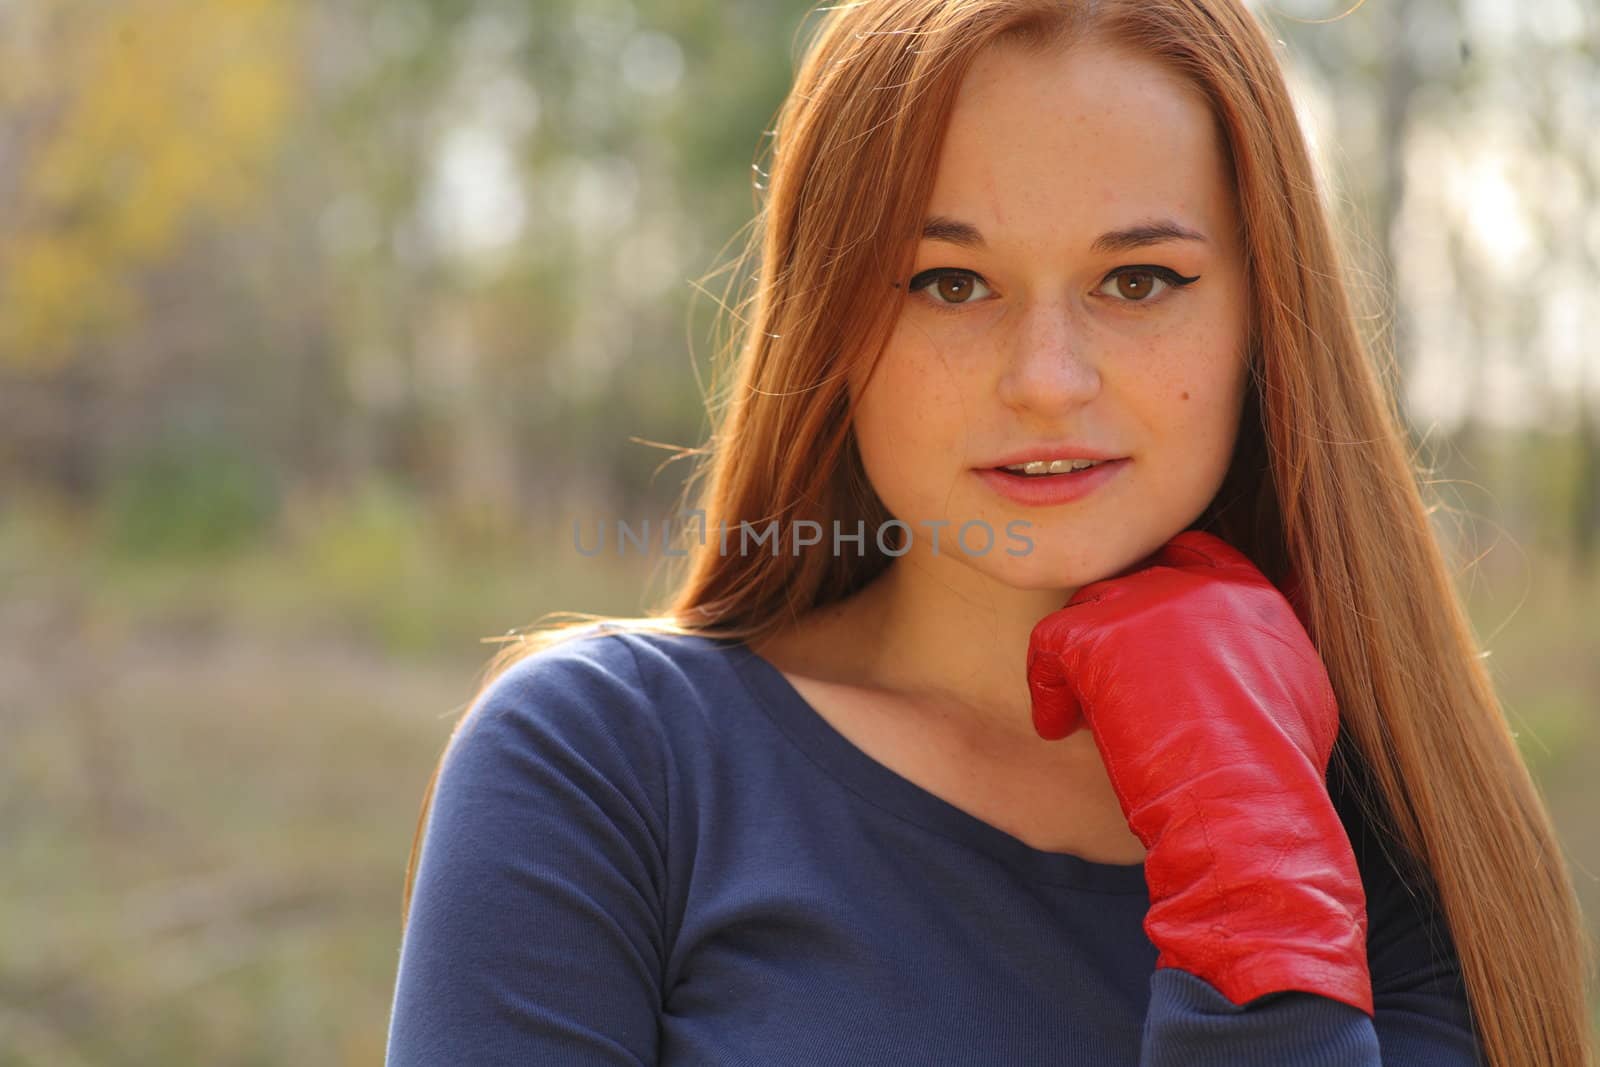 portrait of cute red haired young woman by mettus